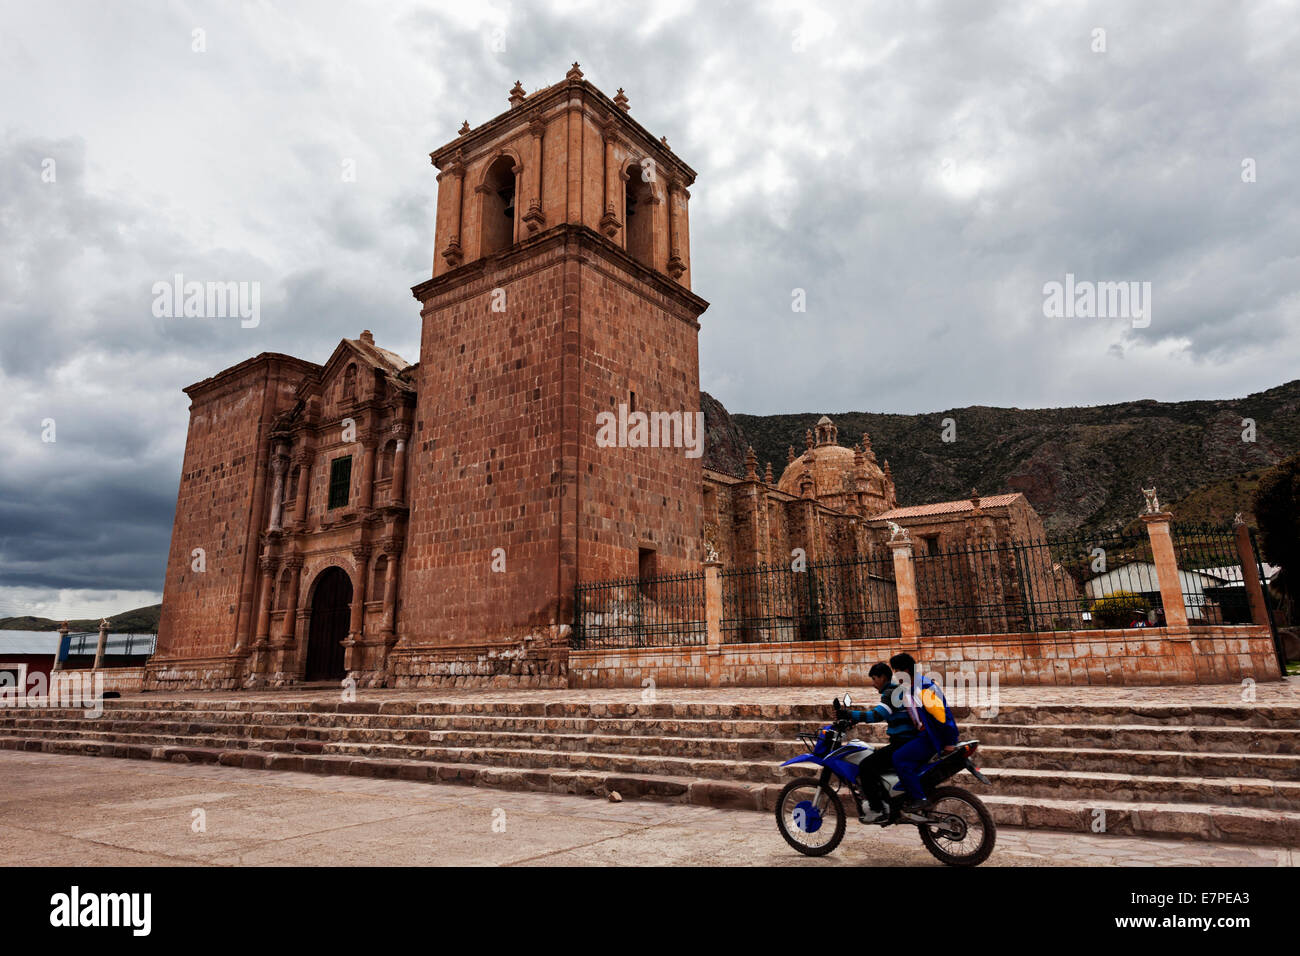 Peru, Arequipa, Two boys on motorcycle passing near old church Stock Photo